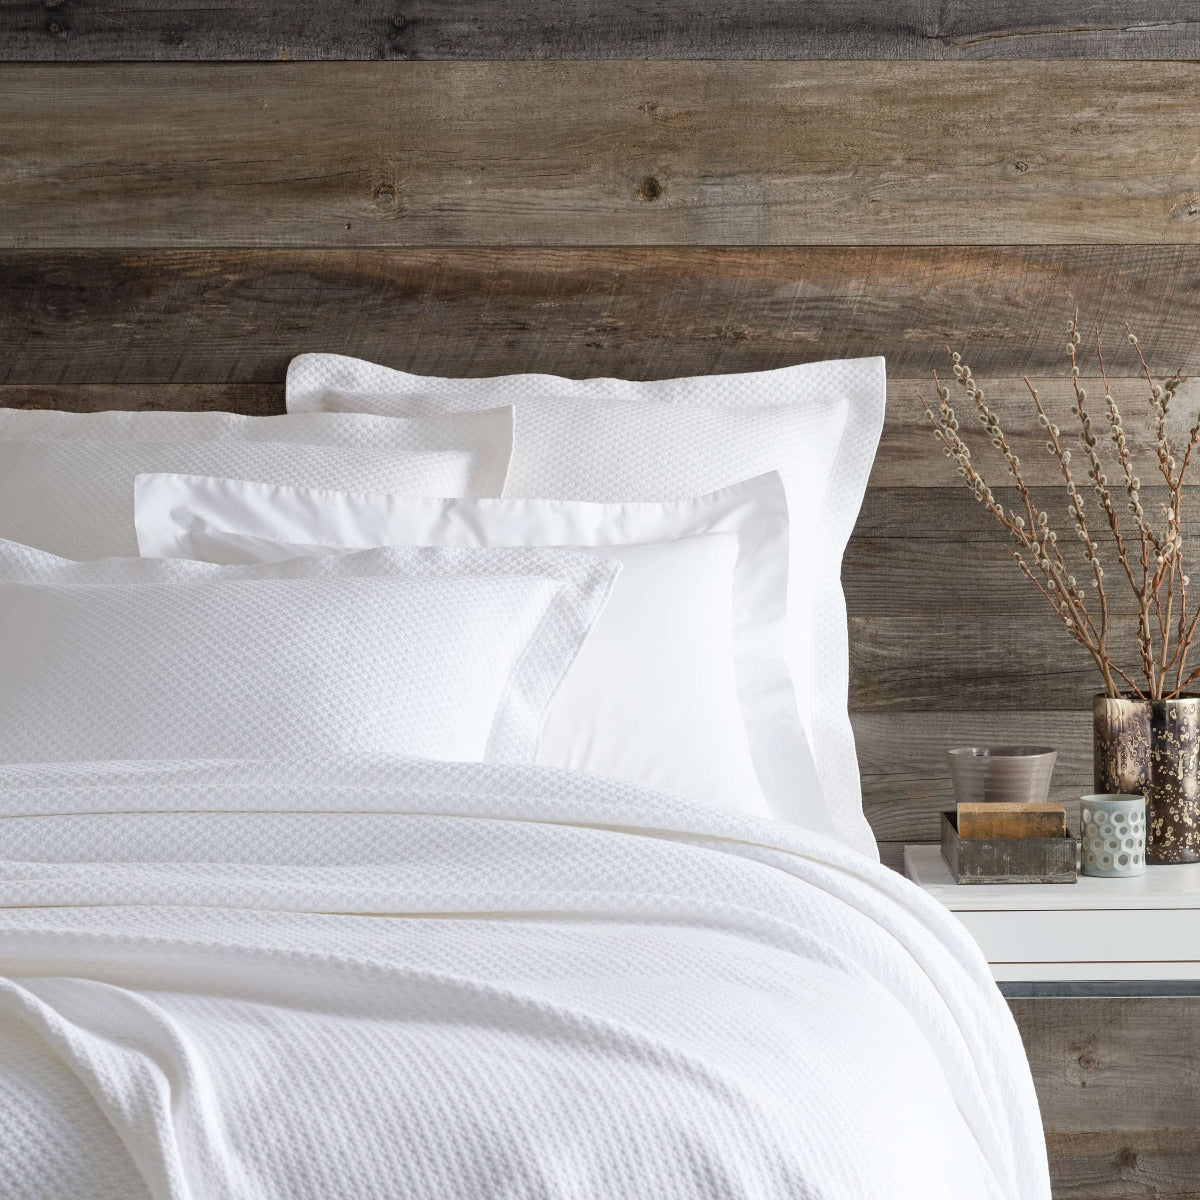 Petite Trellis White Matelasse coverlet styled with white sheets against a wood wall. Styled view. 